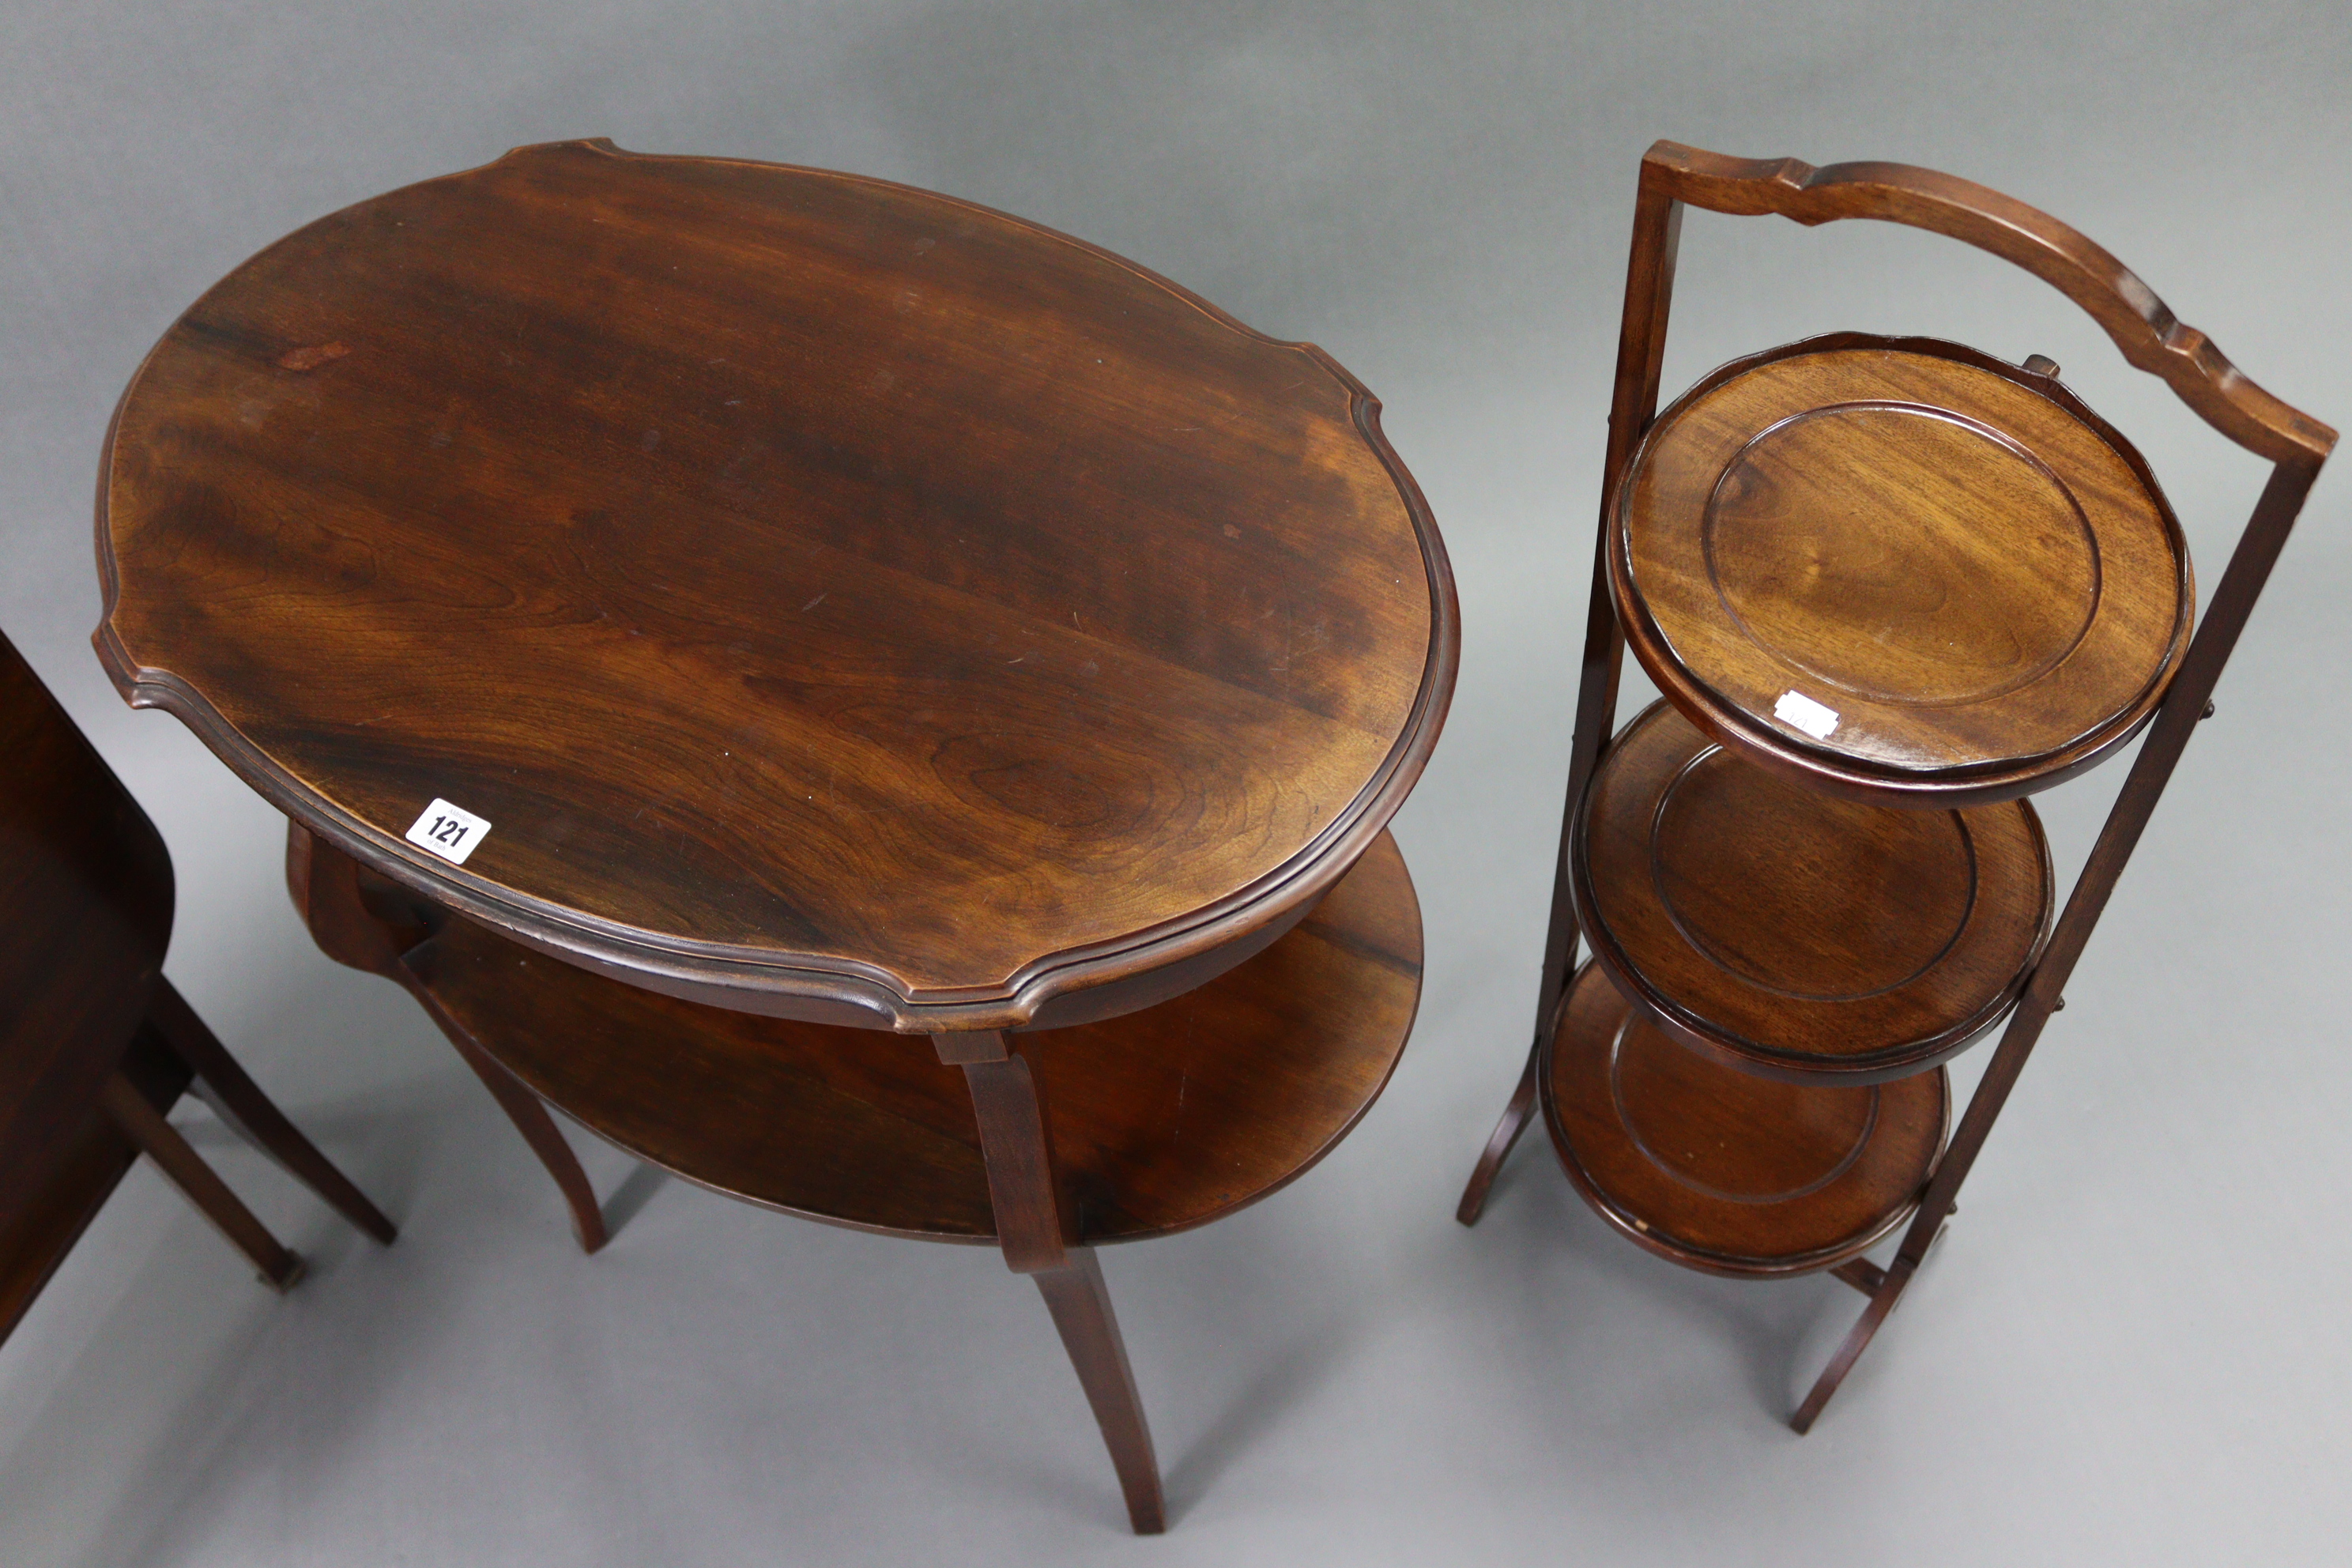 An Edwardian mahogany oval occasional table on four cabriole legs with open undertier, 27” wide; - Image 5 of 6